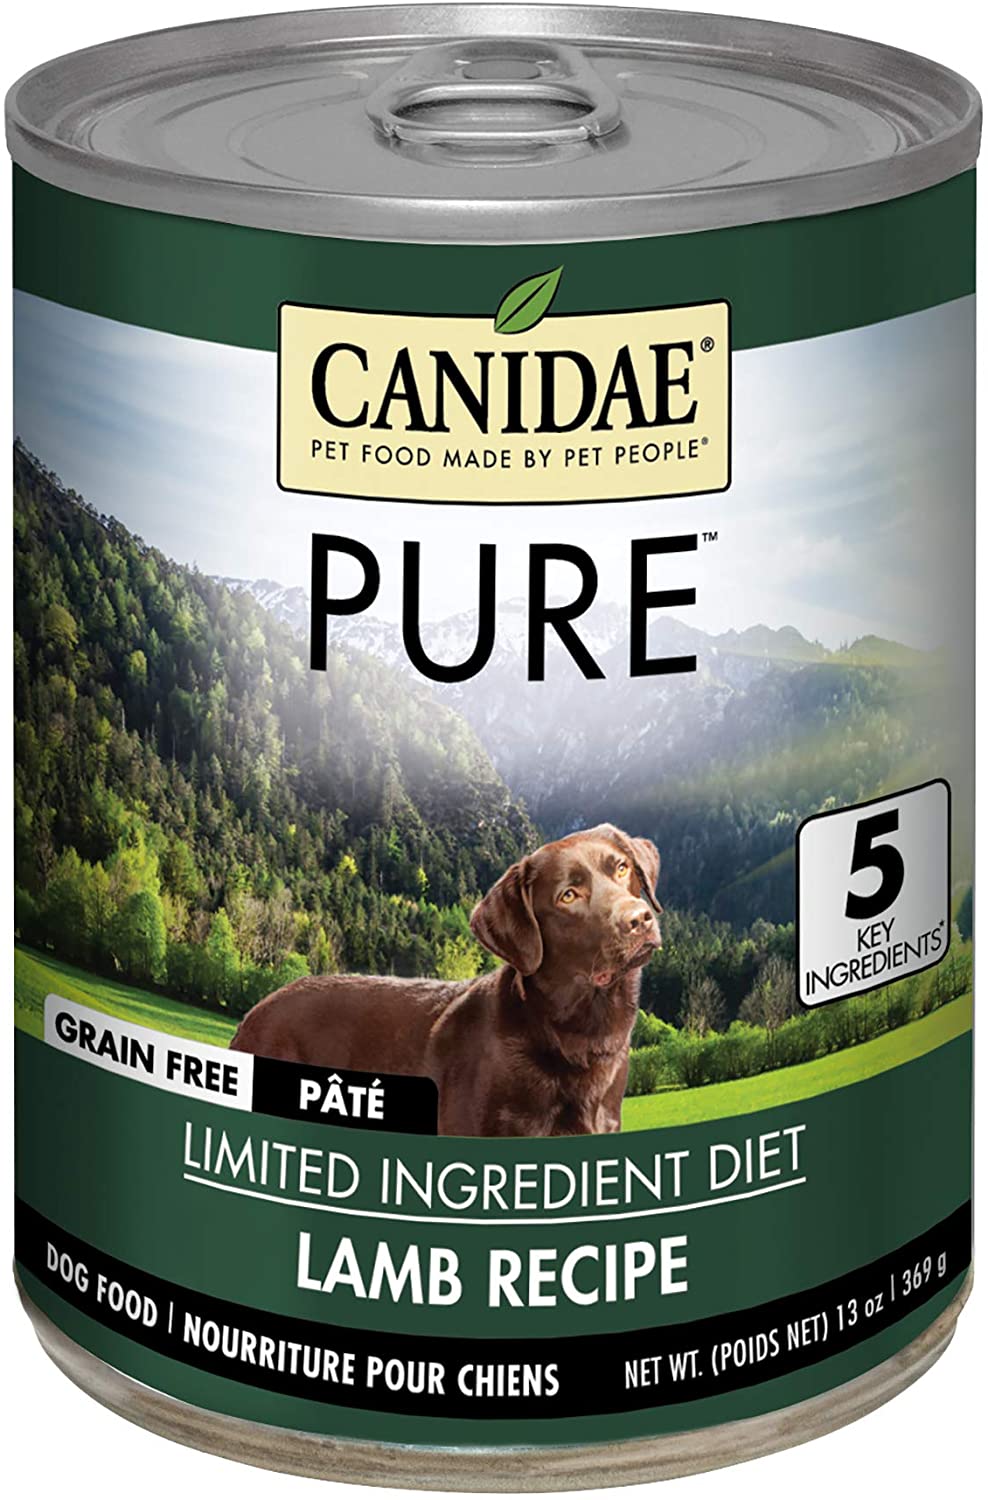 Canidae PURE Grain Free Lamb Recipe for Dogs, 13 oz